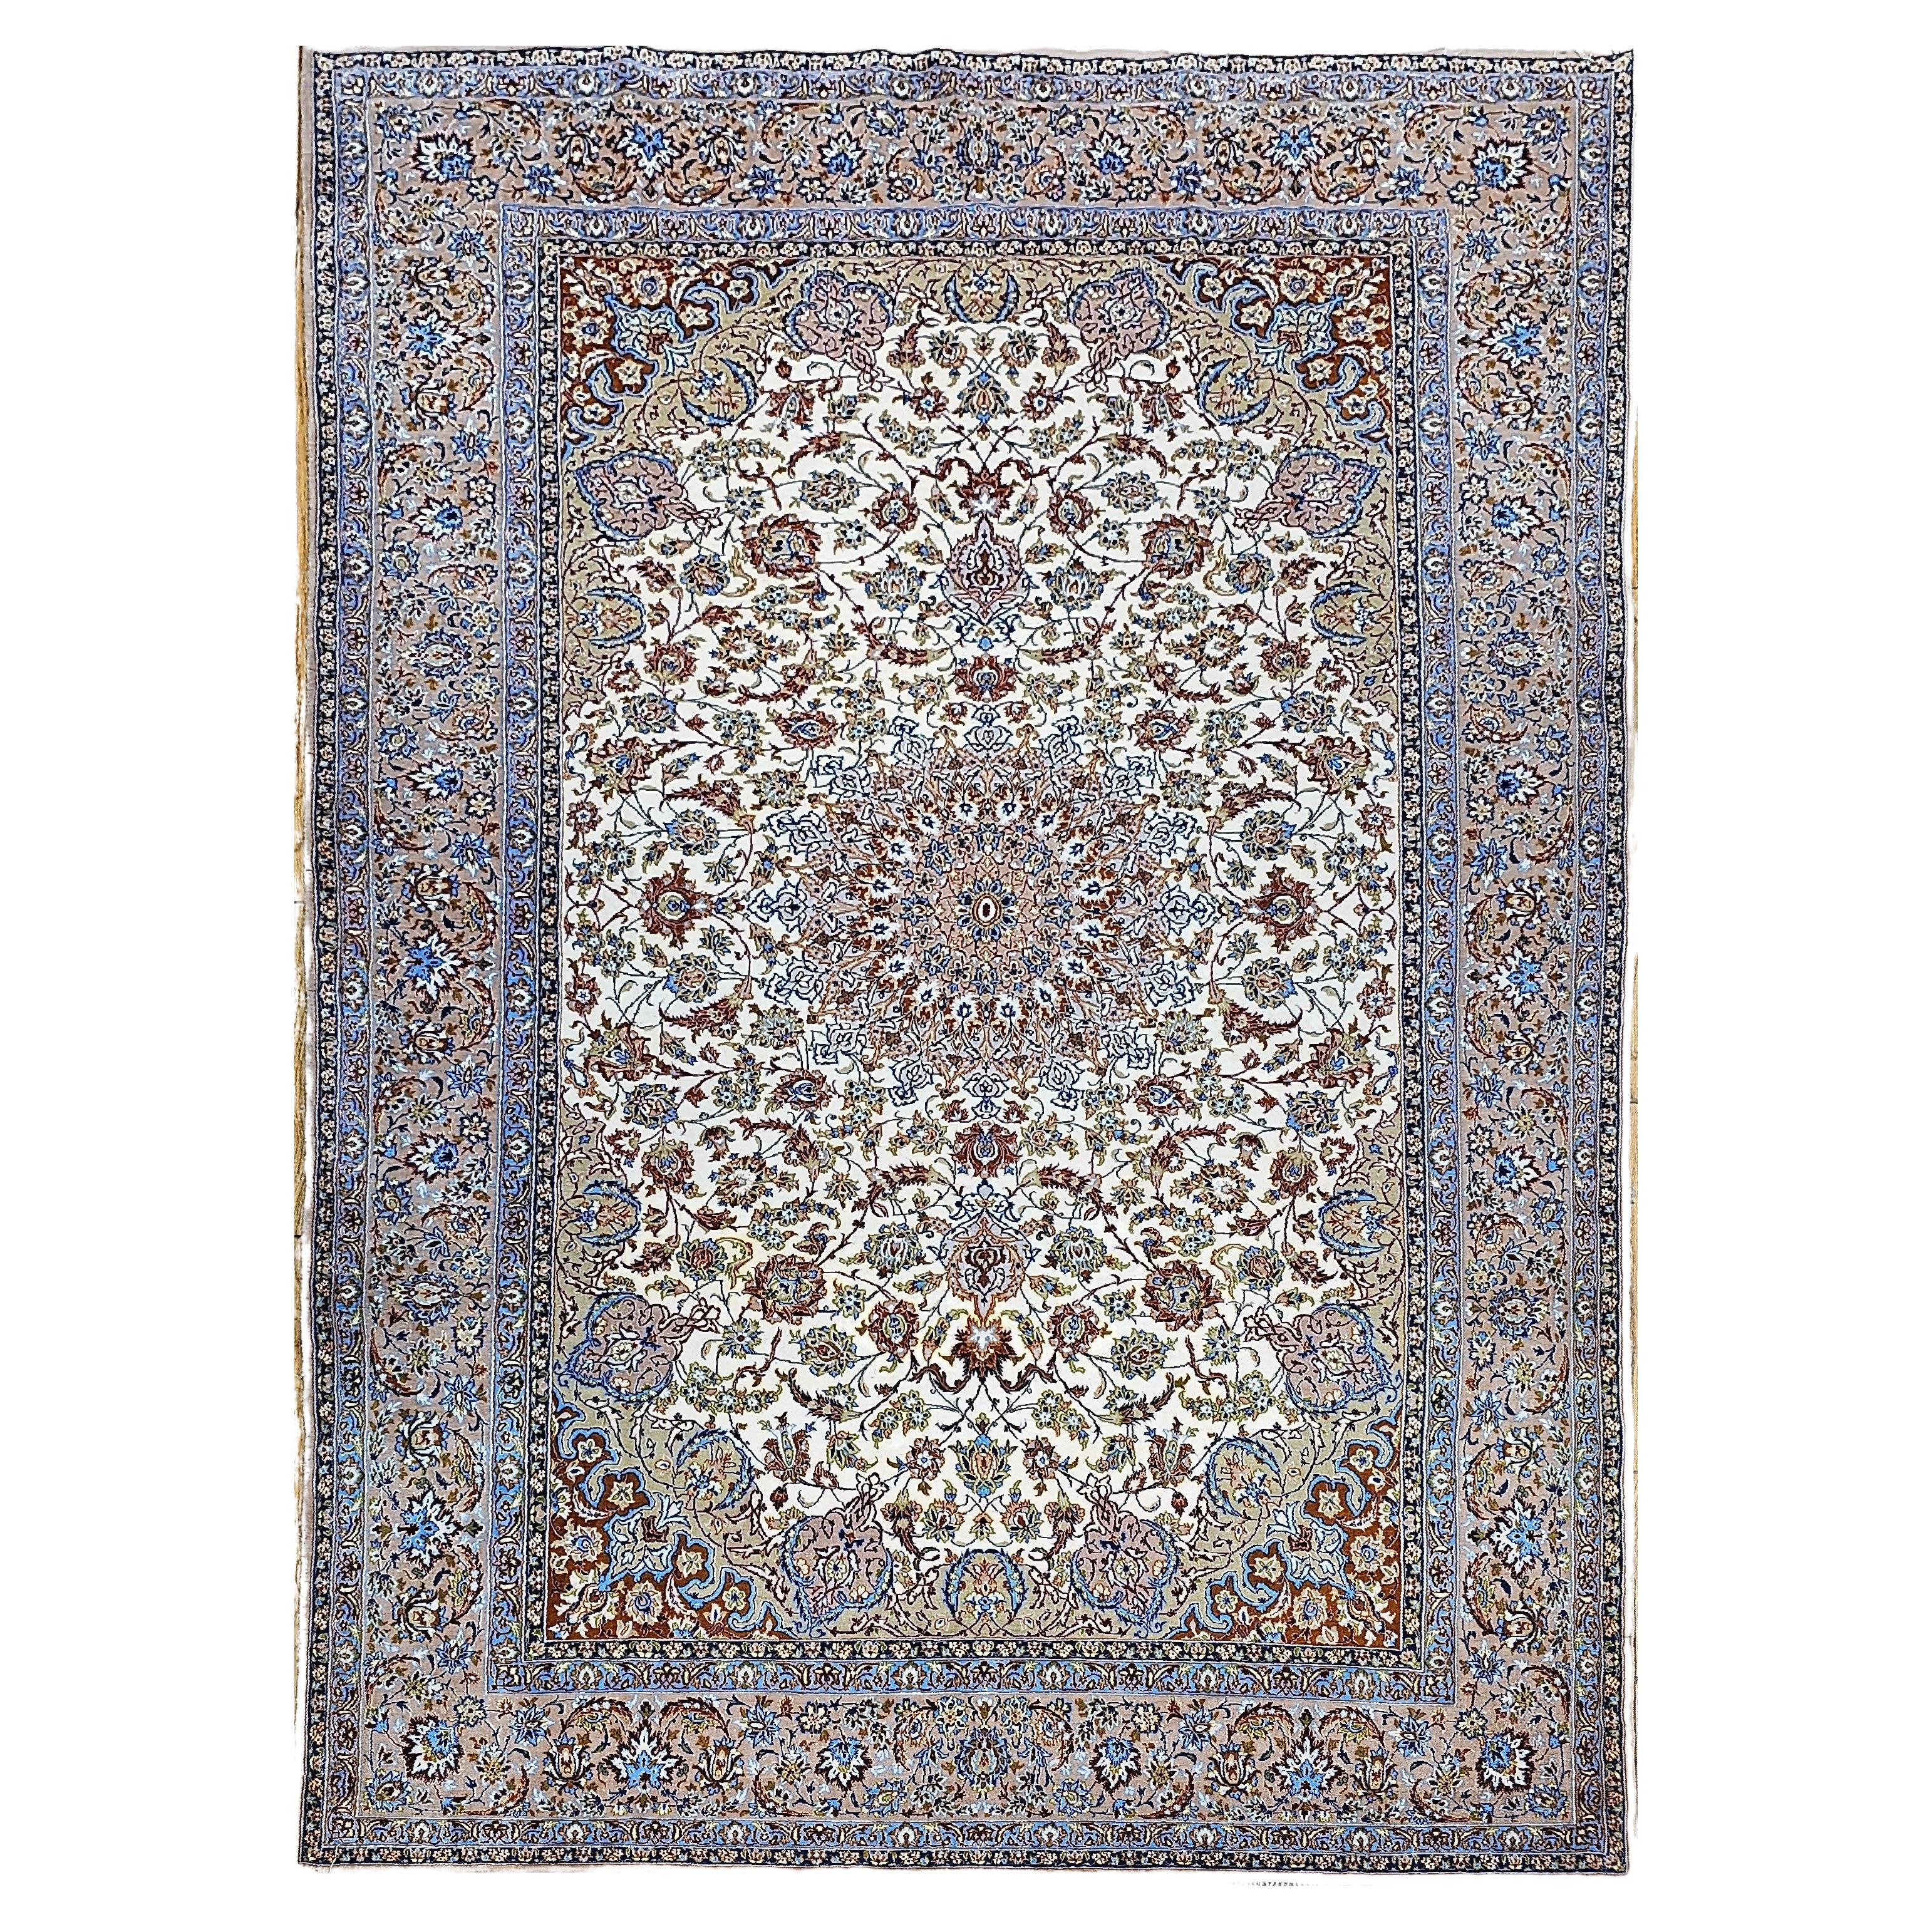 Vintage Persian Isfahan Room Size Rug in Floral Pattern in Ivory, Blue, Green